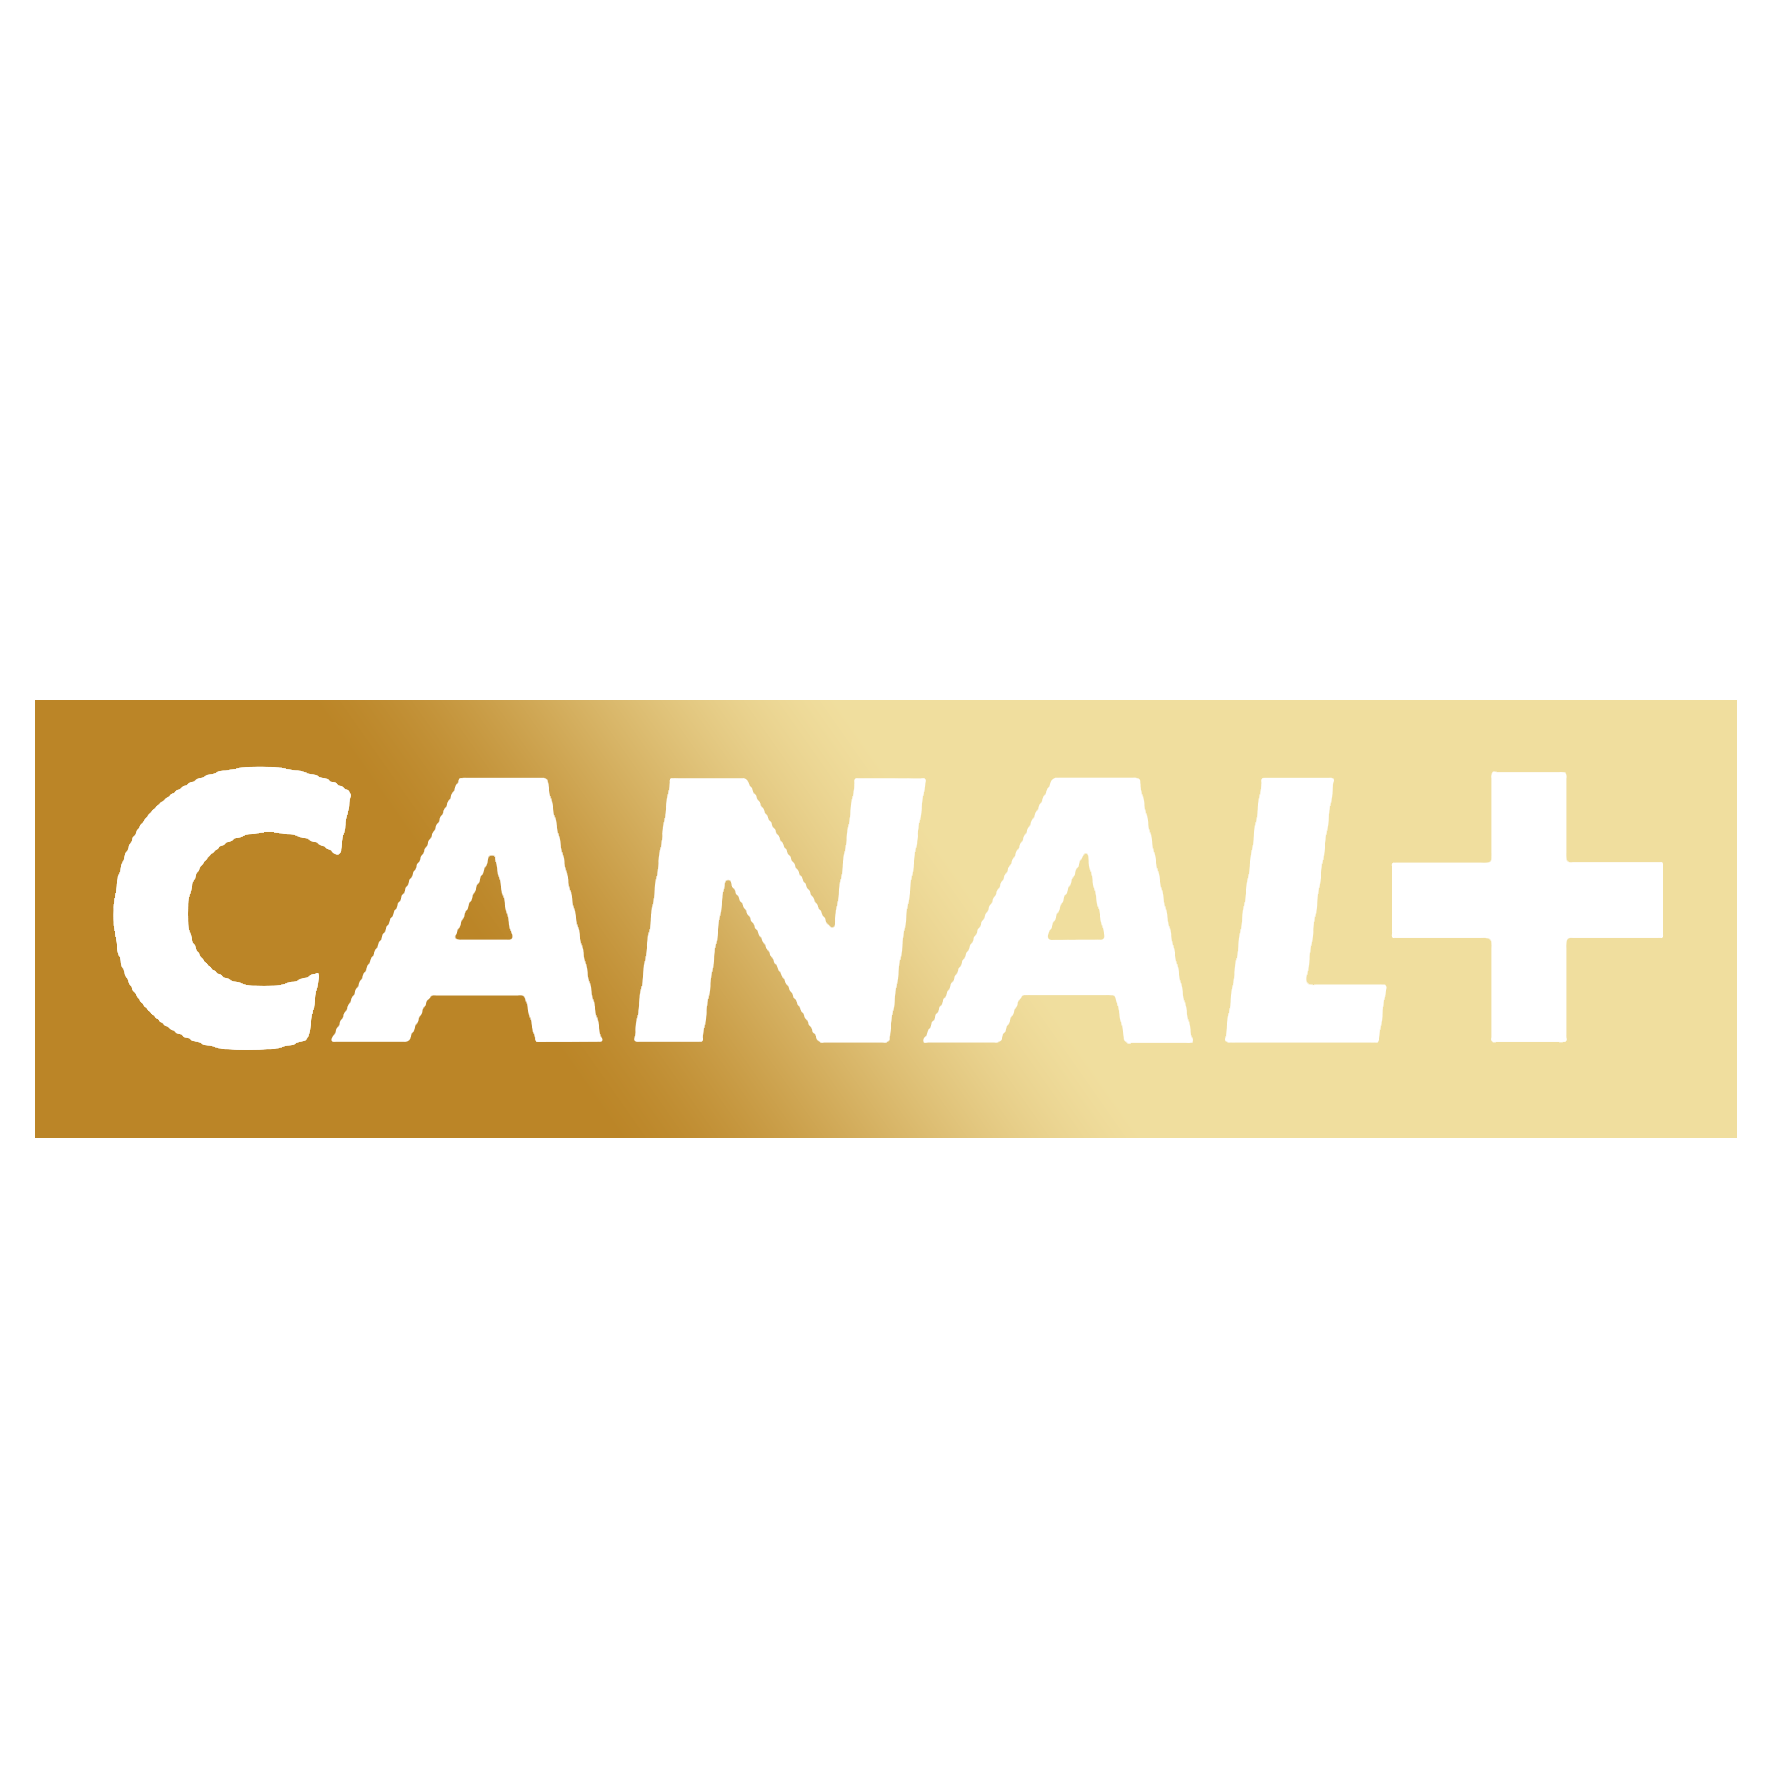 canal.png